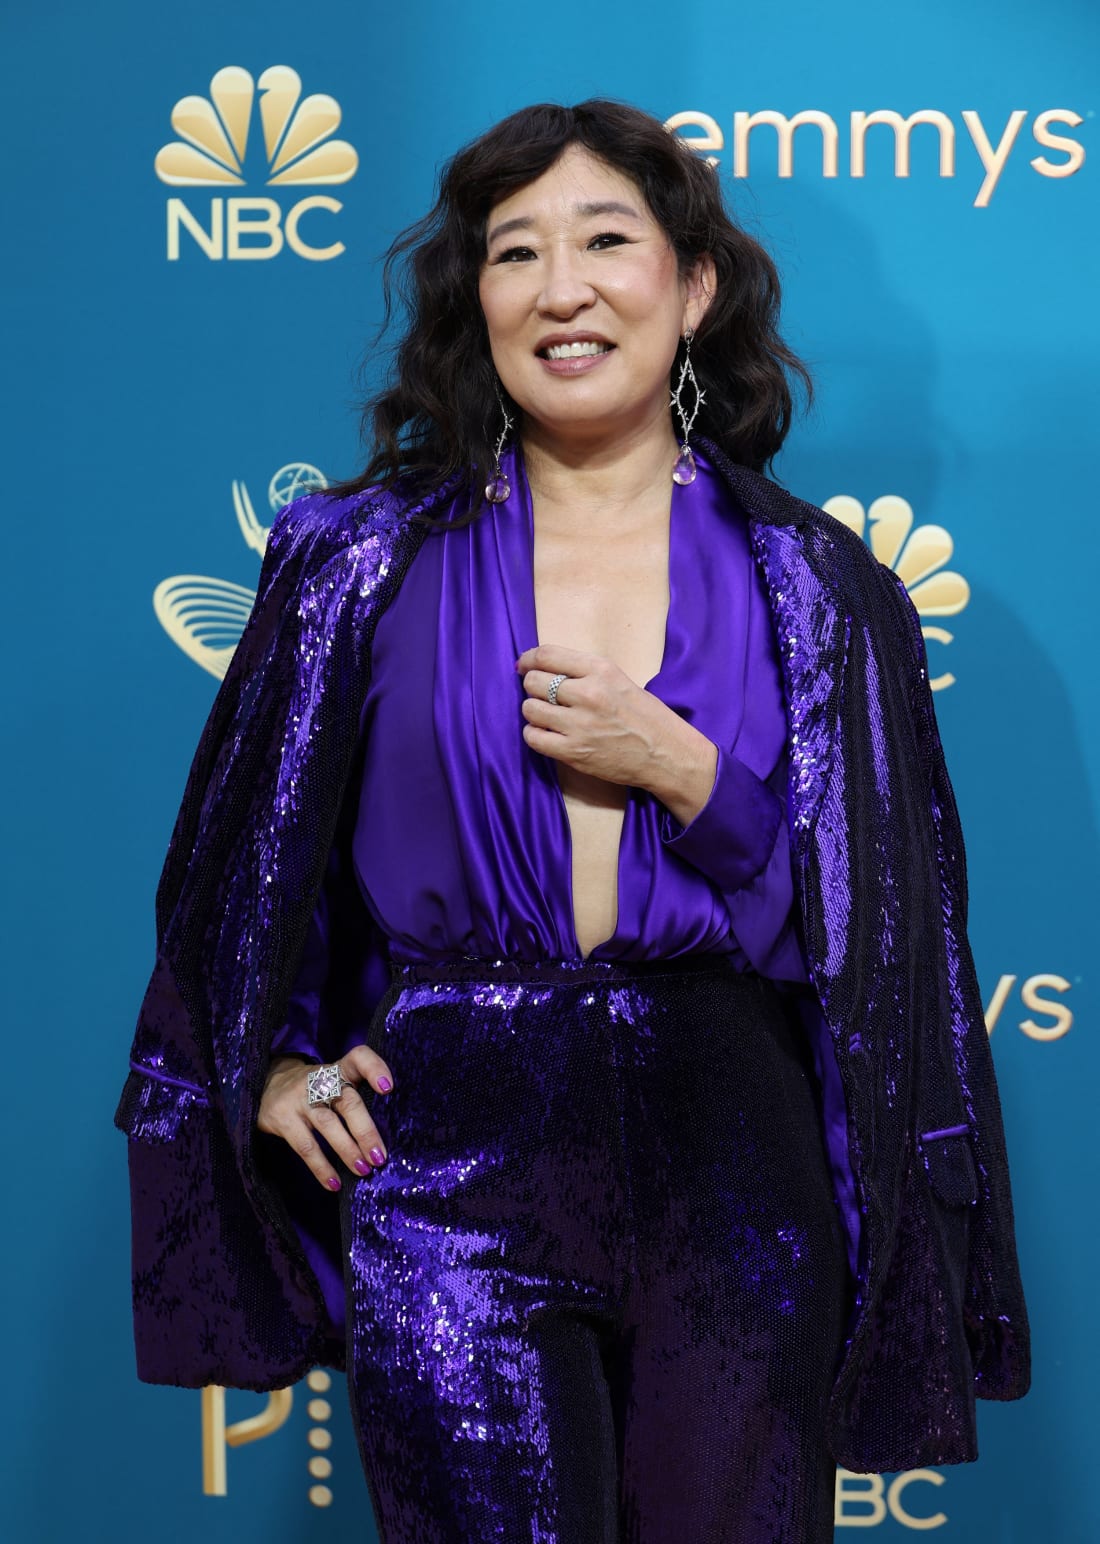 Sandra Oh arrived on the carpet wearing a sequined purple jumpsuit and cape by Rodarte.